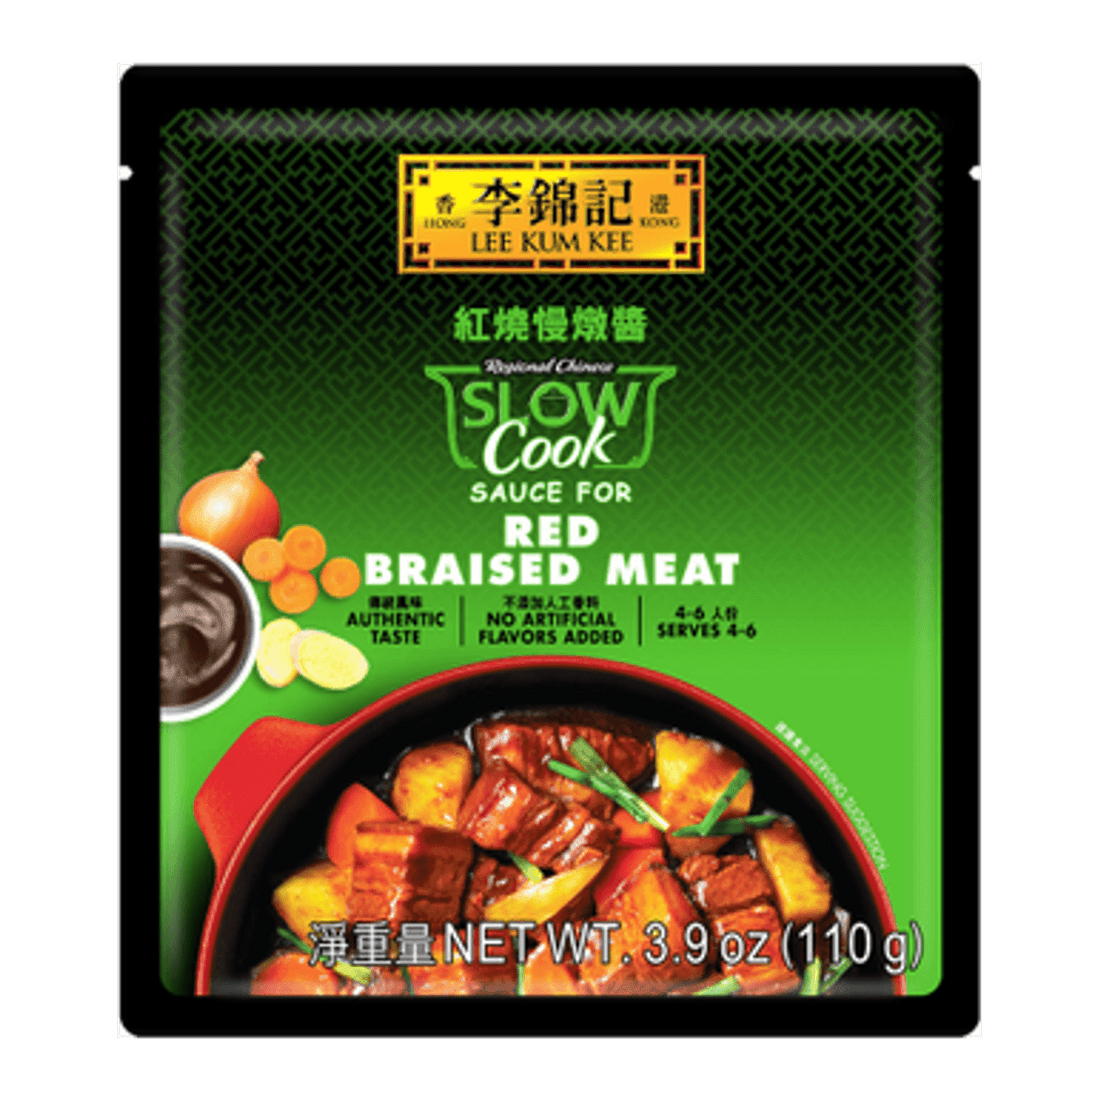 Lee Kum Kee Slow Cook Sauce for Braised Meat 3.9oz(110g) - Anytime Basket